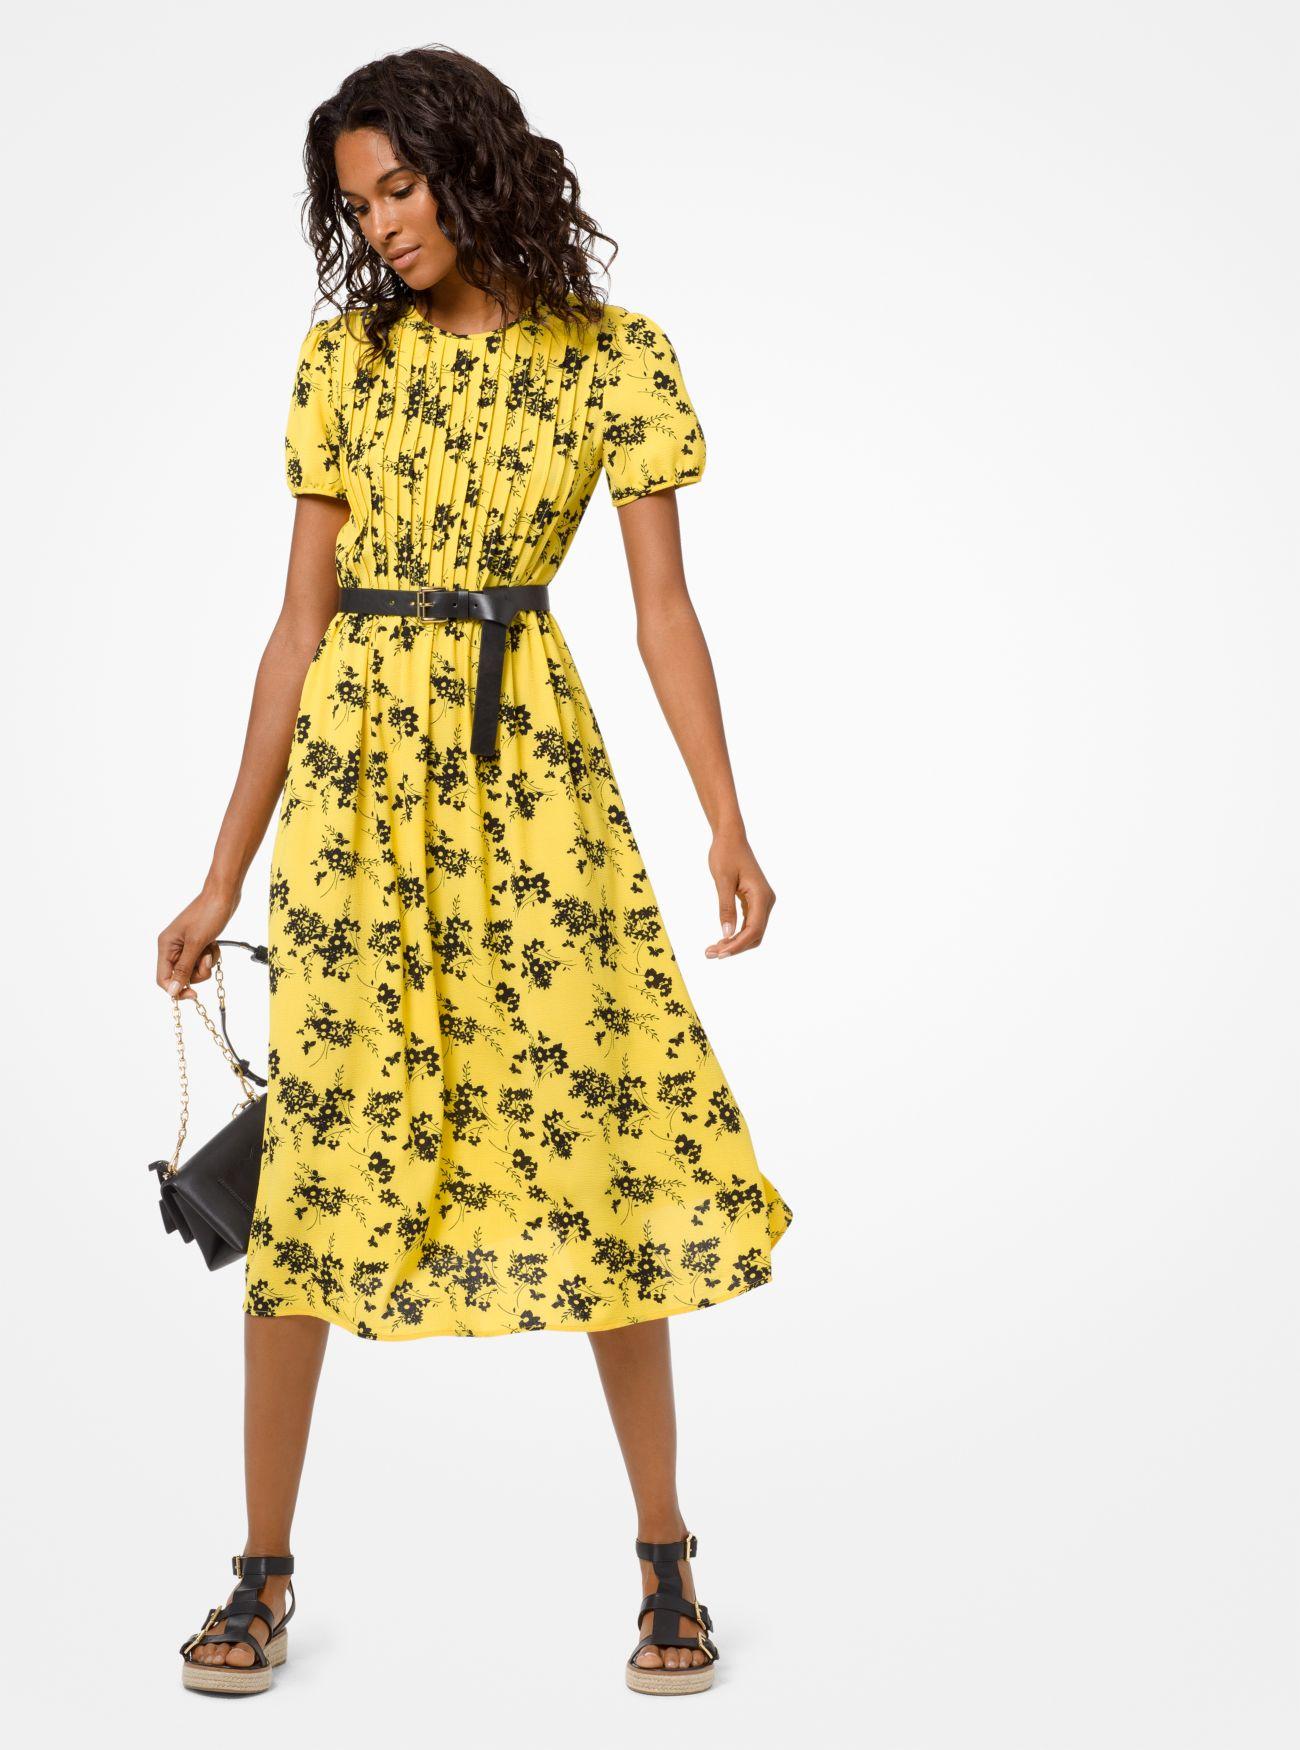 Michael Kors Botanical Pintucked Dress in Yellow | Lyst Canada